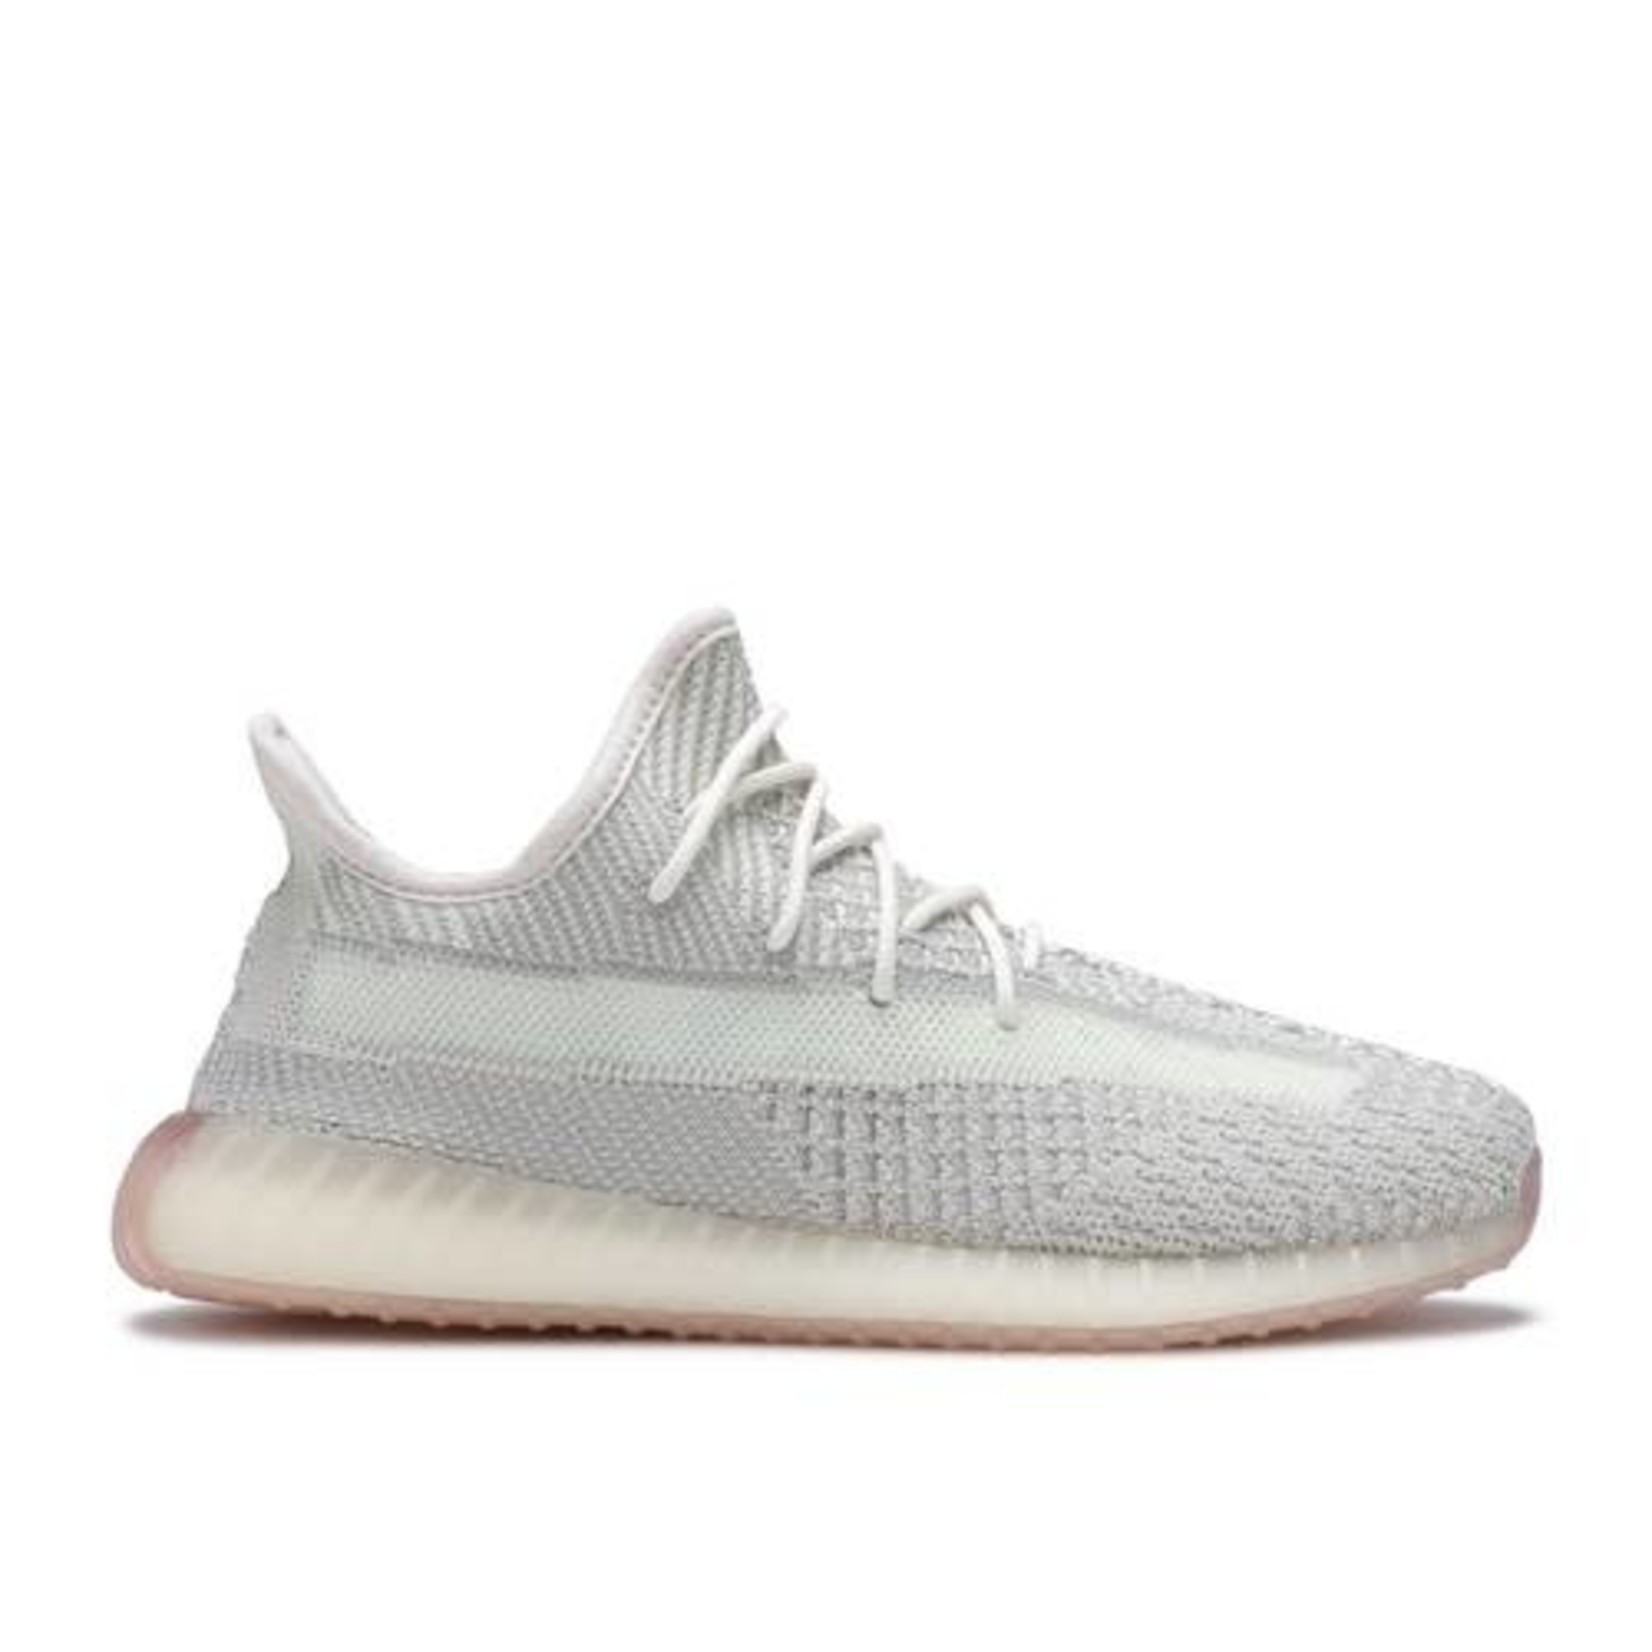 Adidas adidas Yeezy Boost 350 V2 Citrin (Kids) Size 2.5, DS BRAND NEW